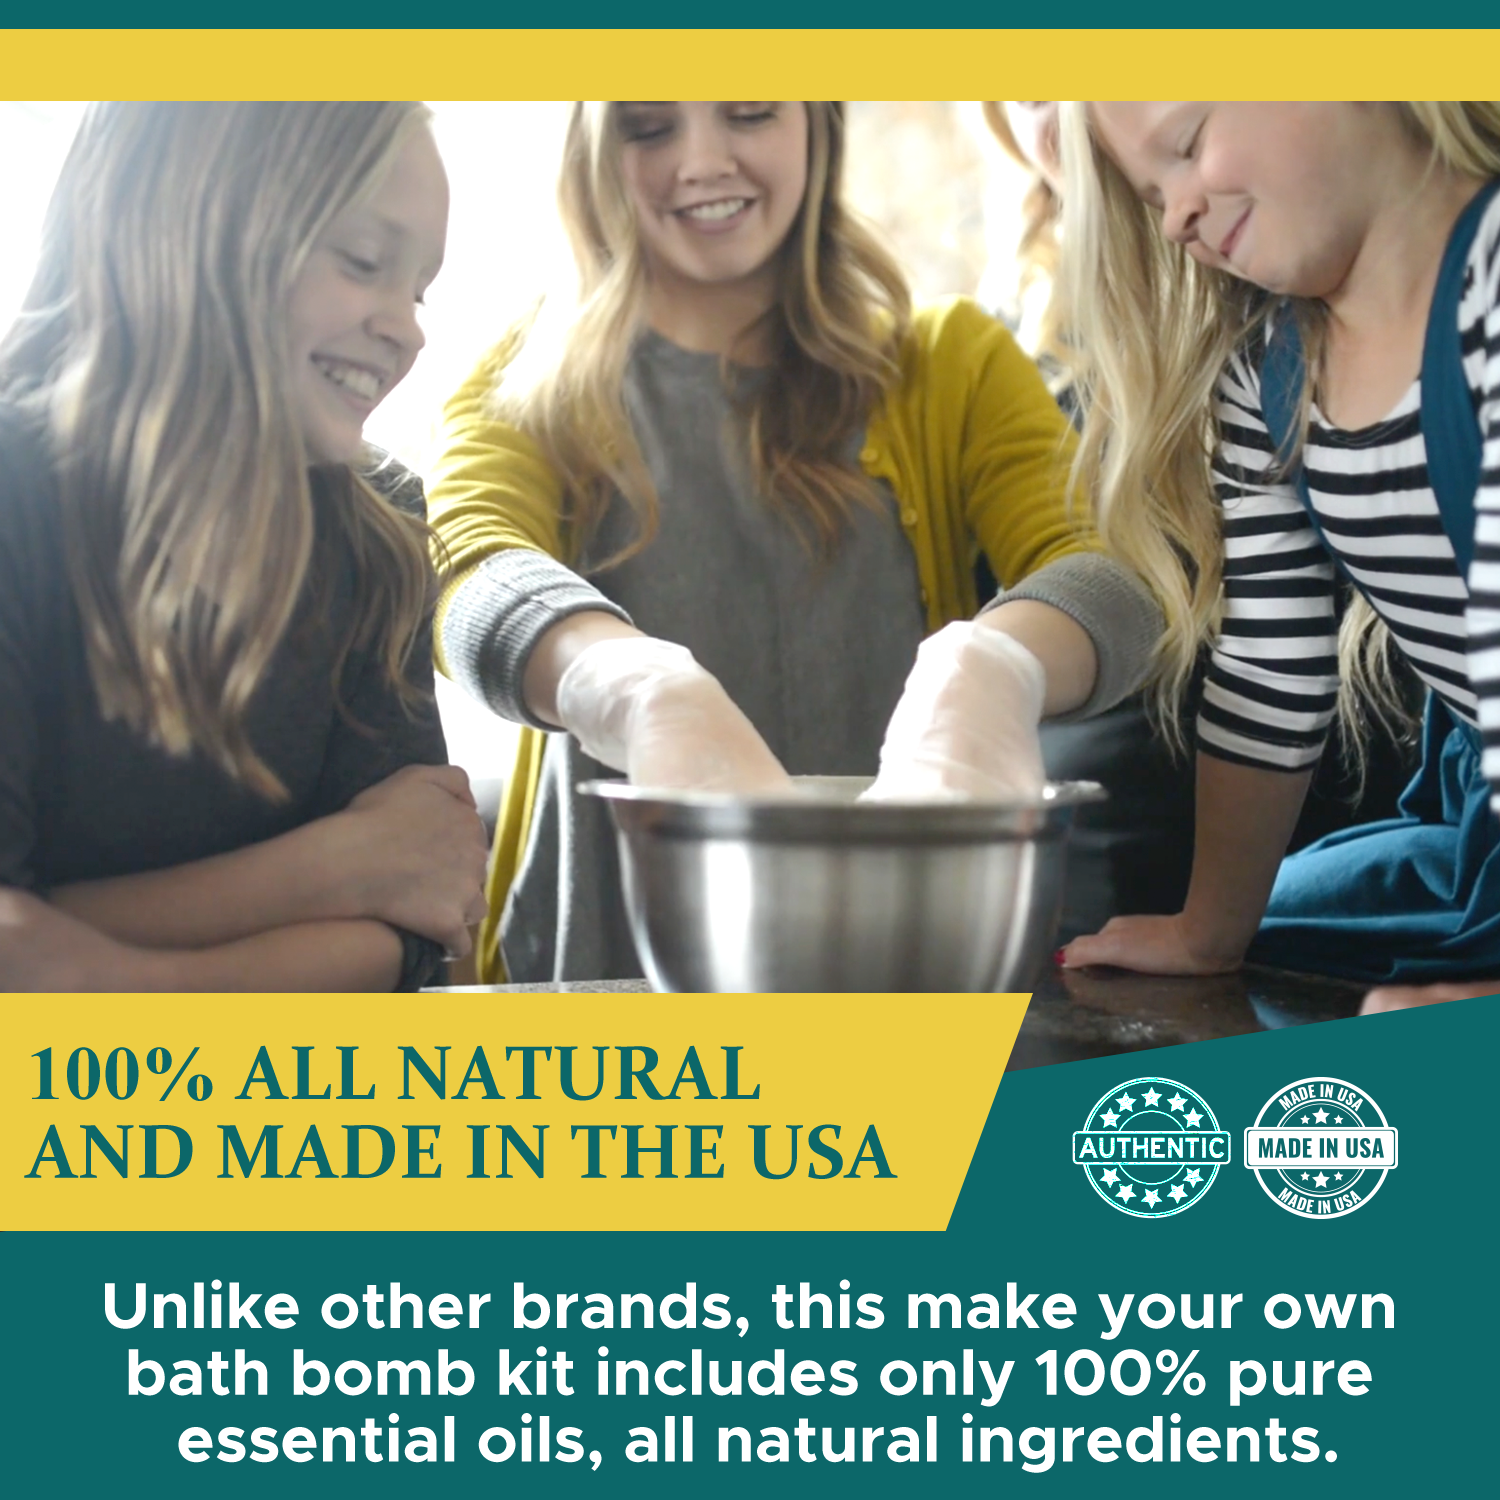 Bath Bomb Kit: 5 Best Bath Bomb Kits of 2021 for Home & Gifts